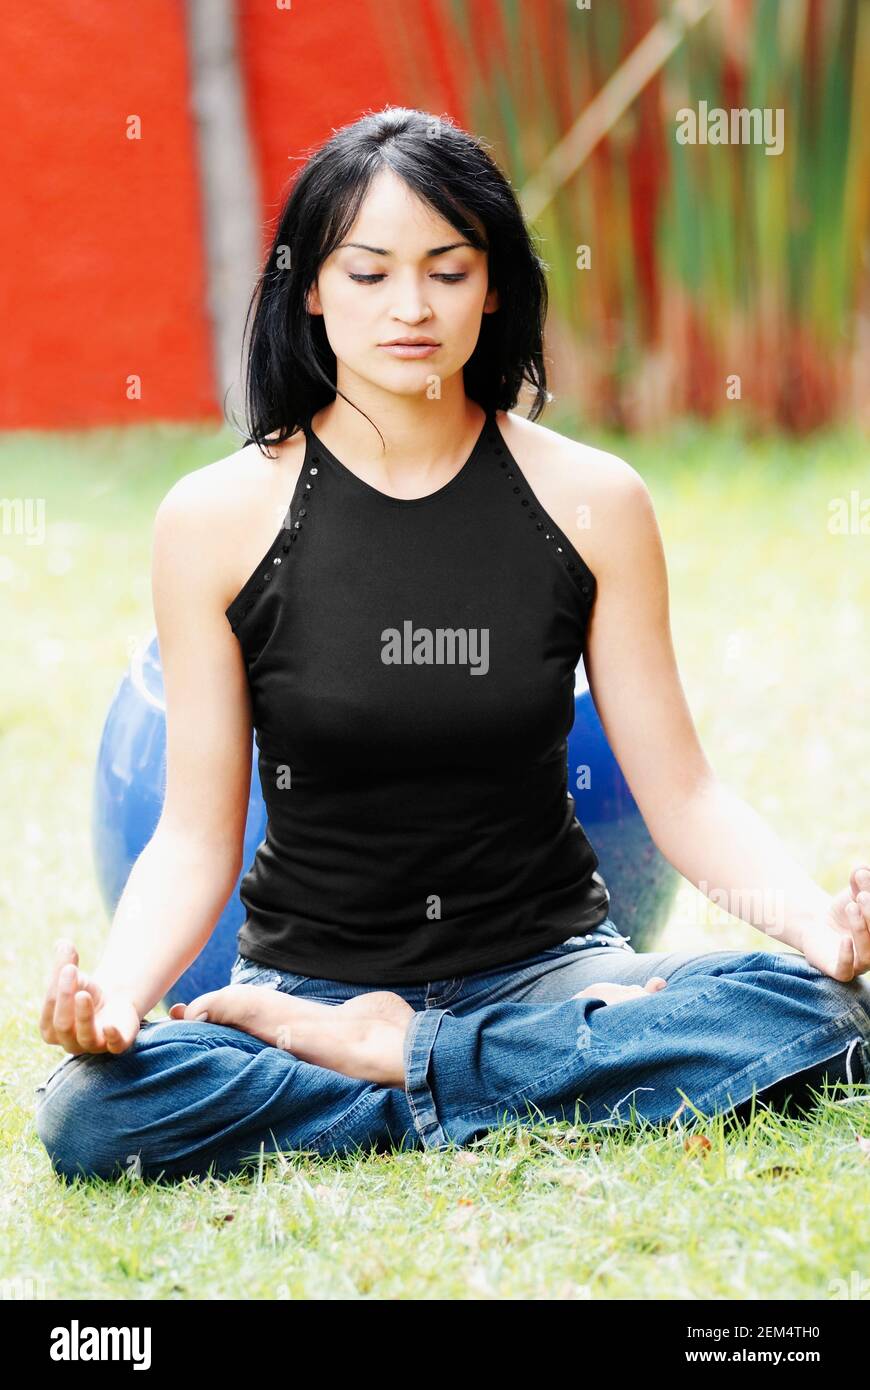 Young woman meditating on a lawn Stock Photo